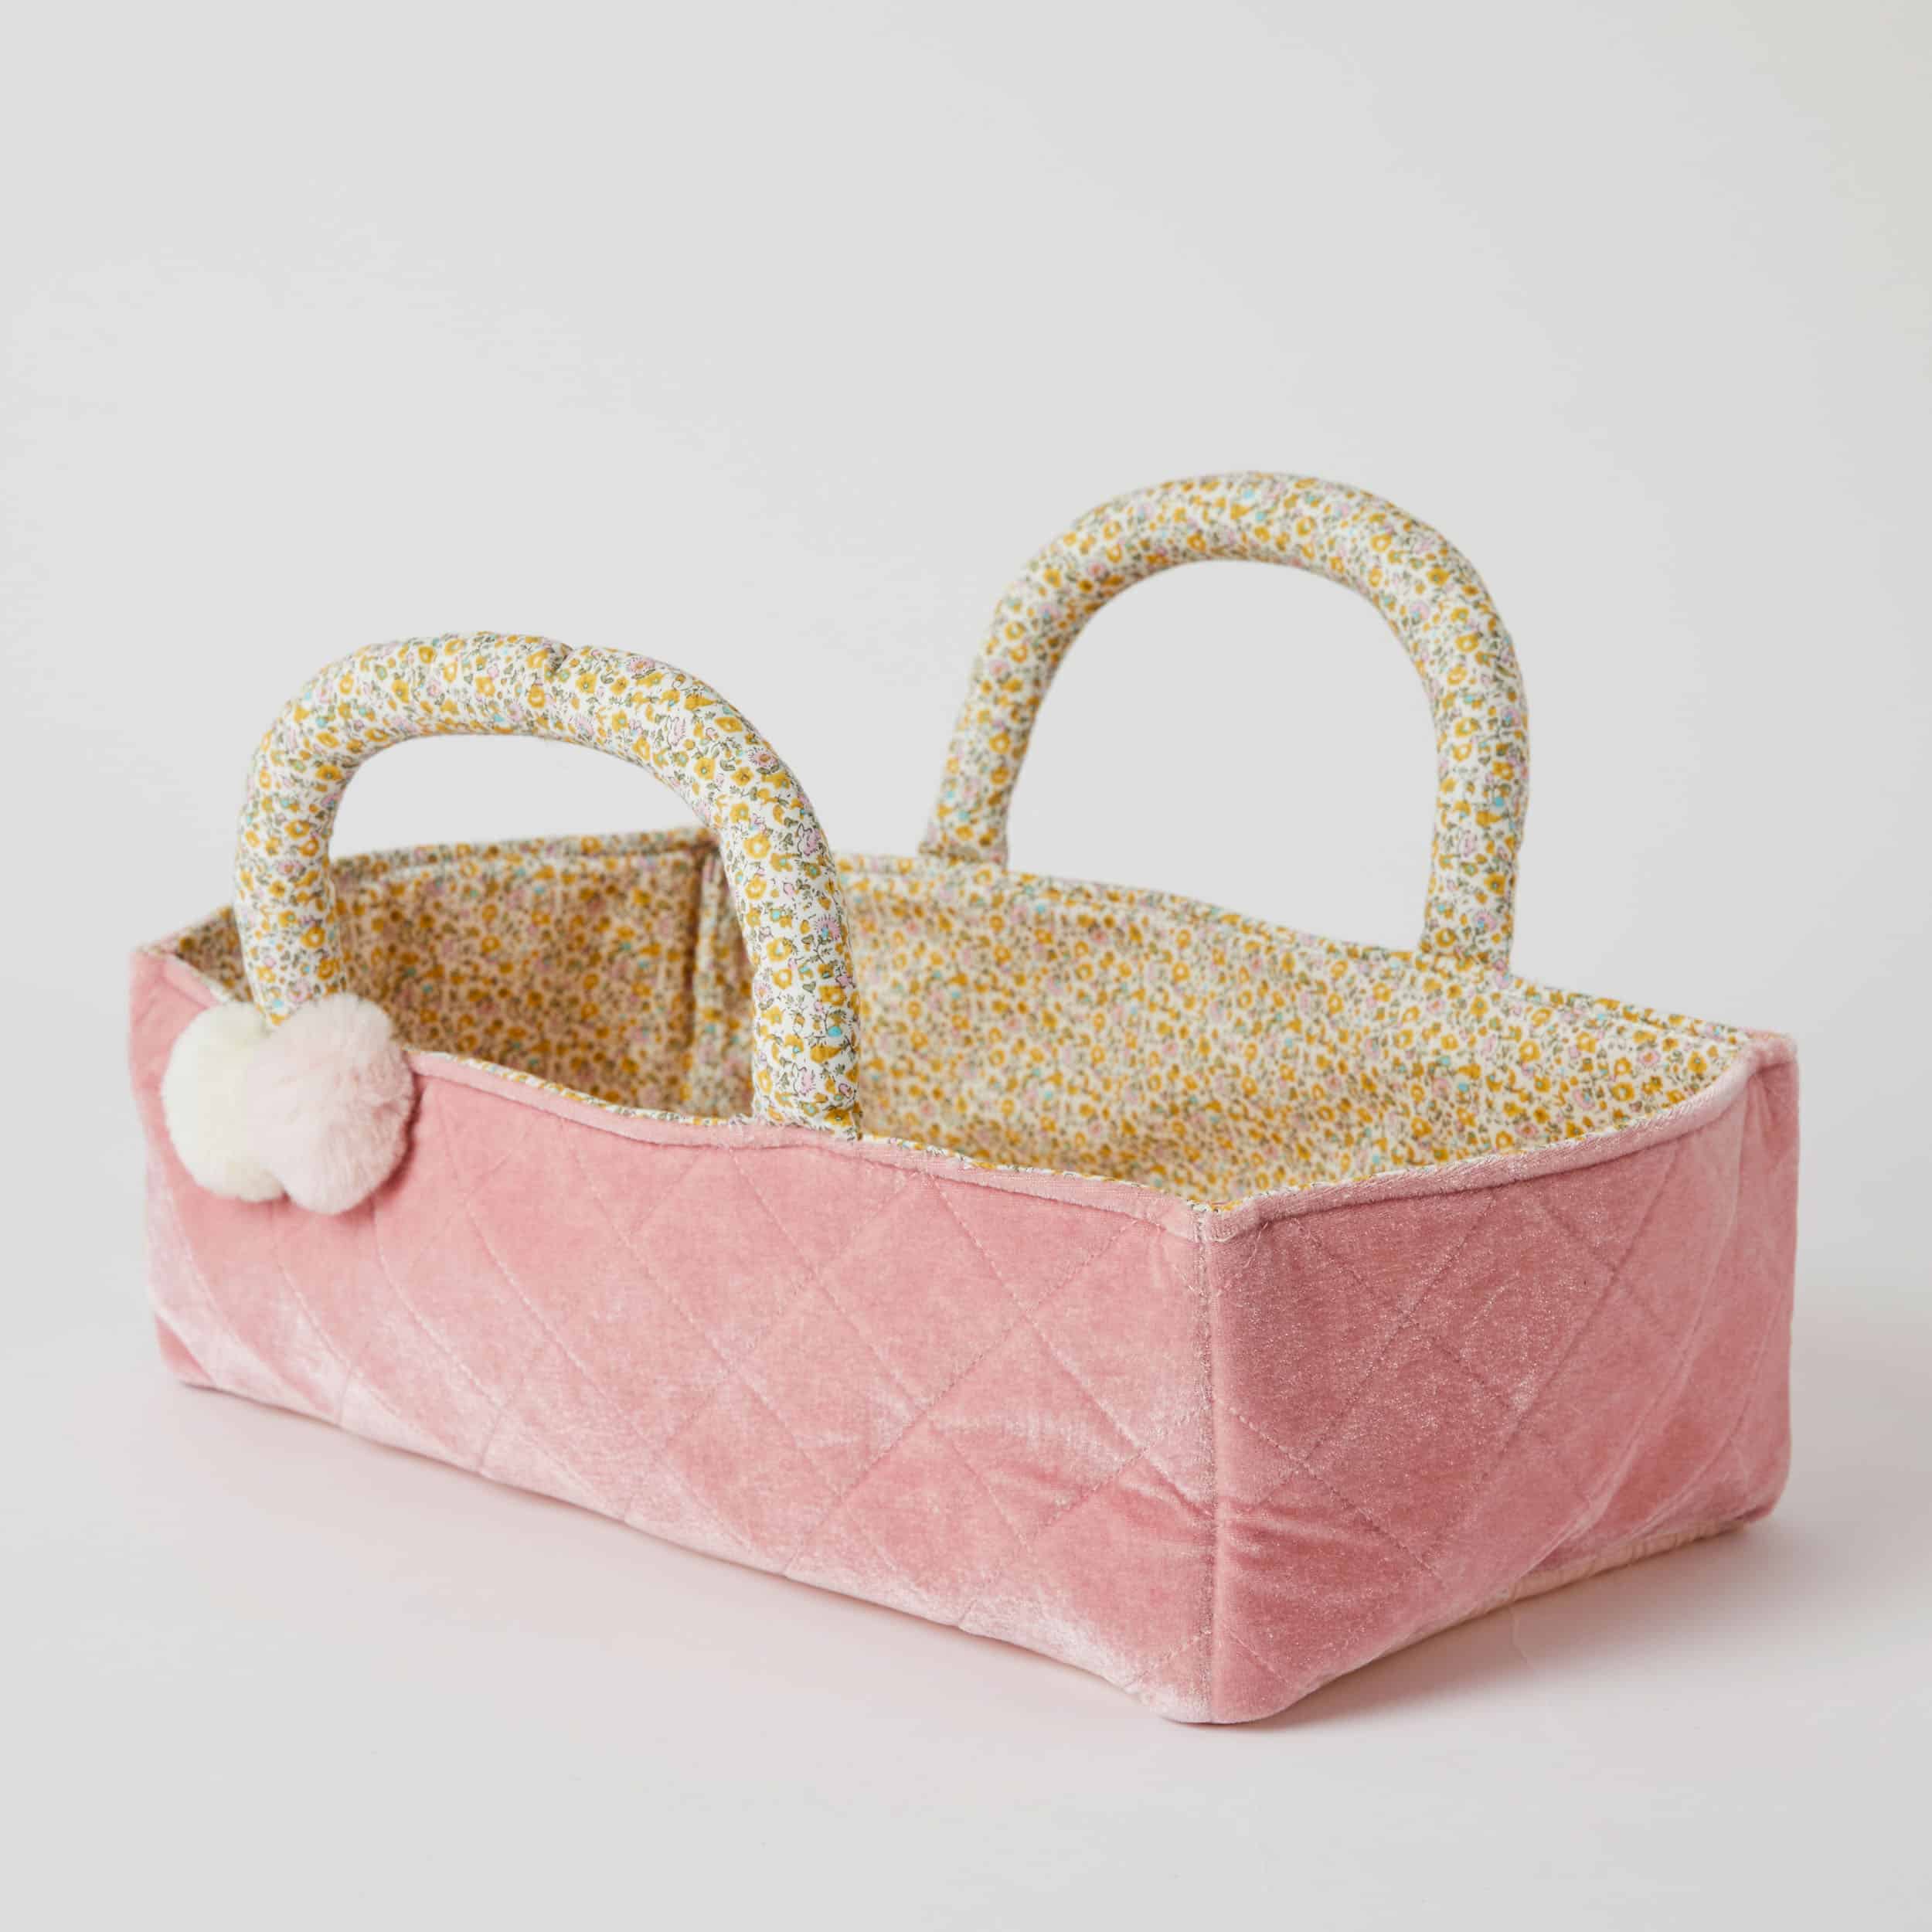 Toy Carry Cot-Toys-Pilbeam Living-The Bay Room